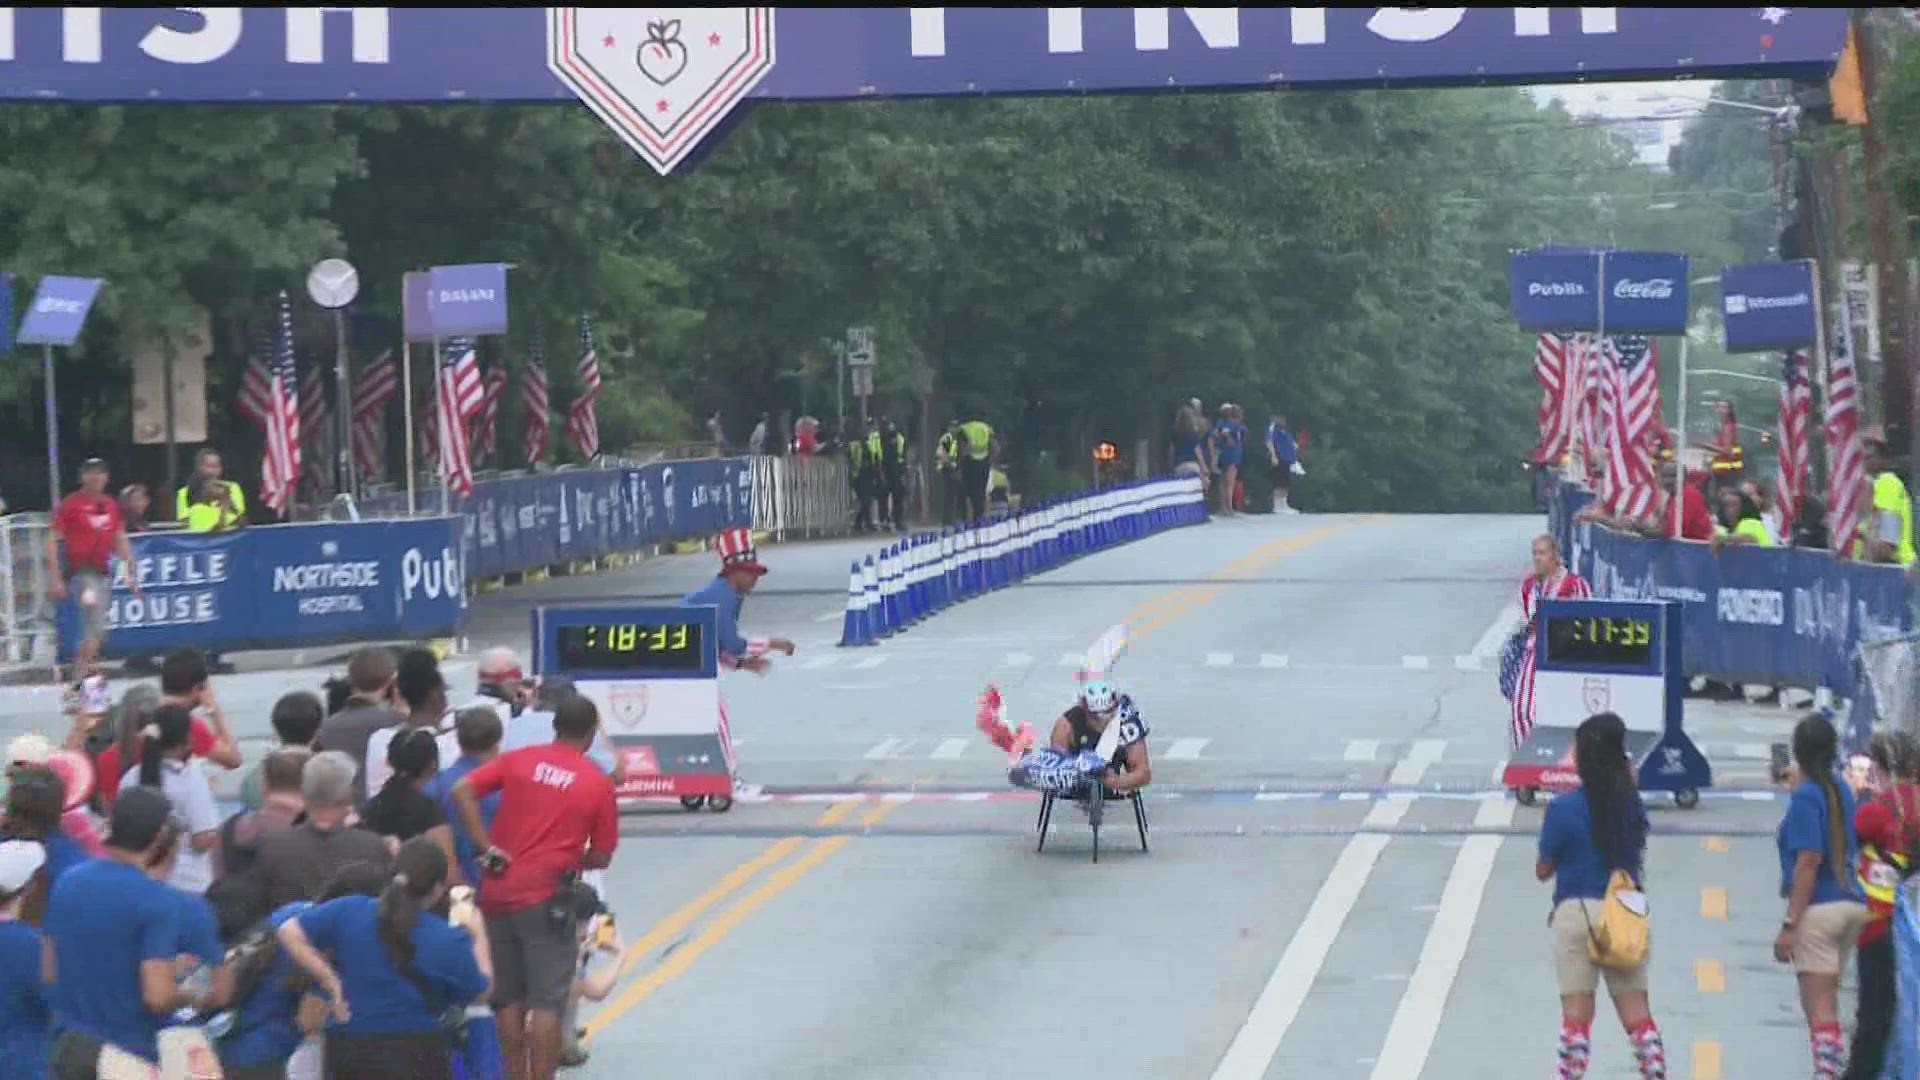 Watch as the first person cross in the finish line in the men's wheelchair race.